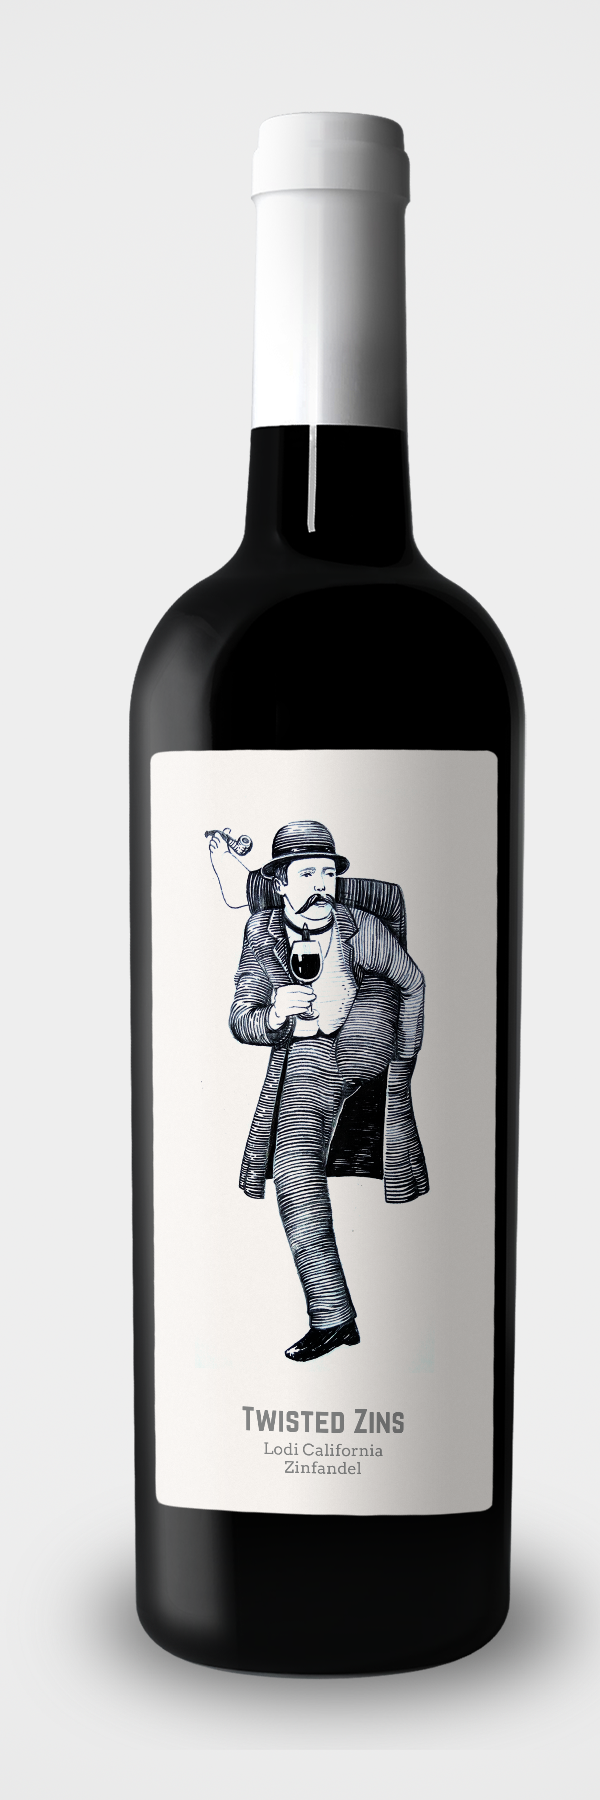 Contemporary wine label featuring old-school character